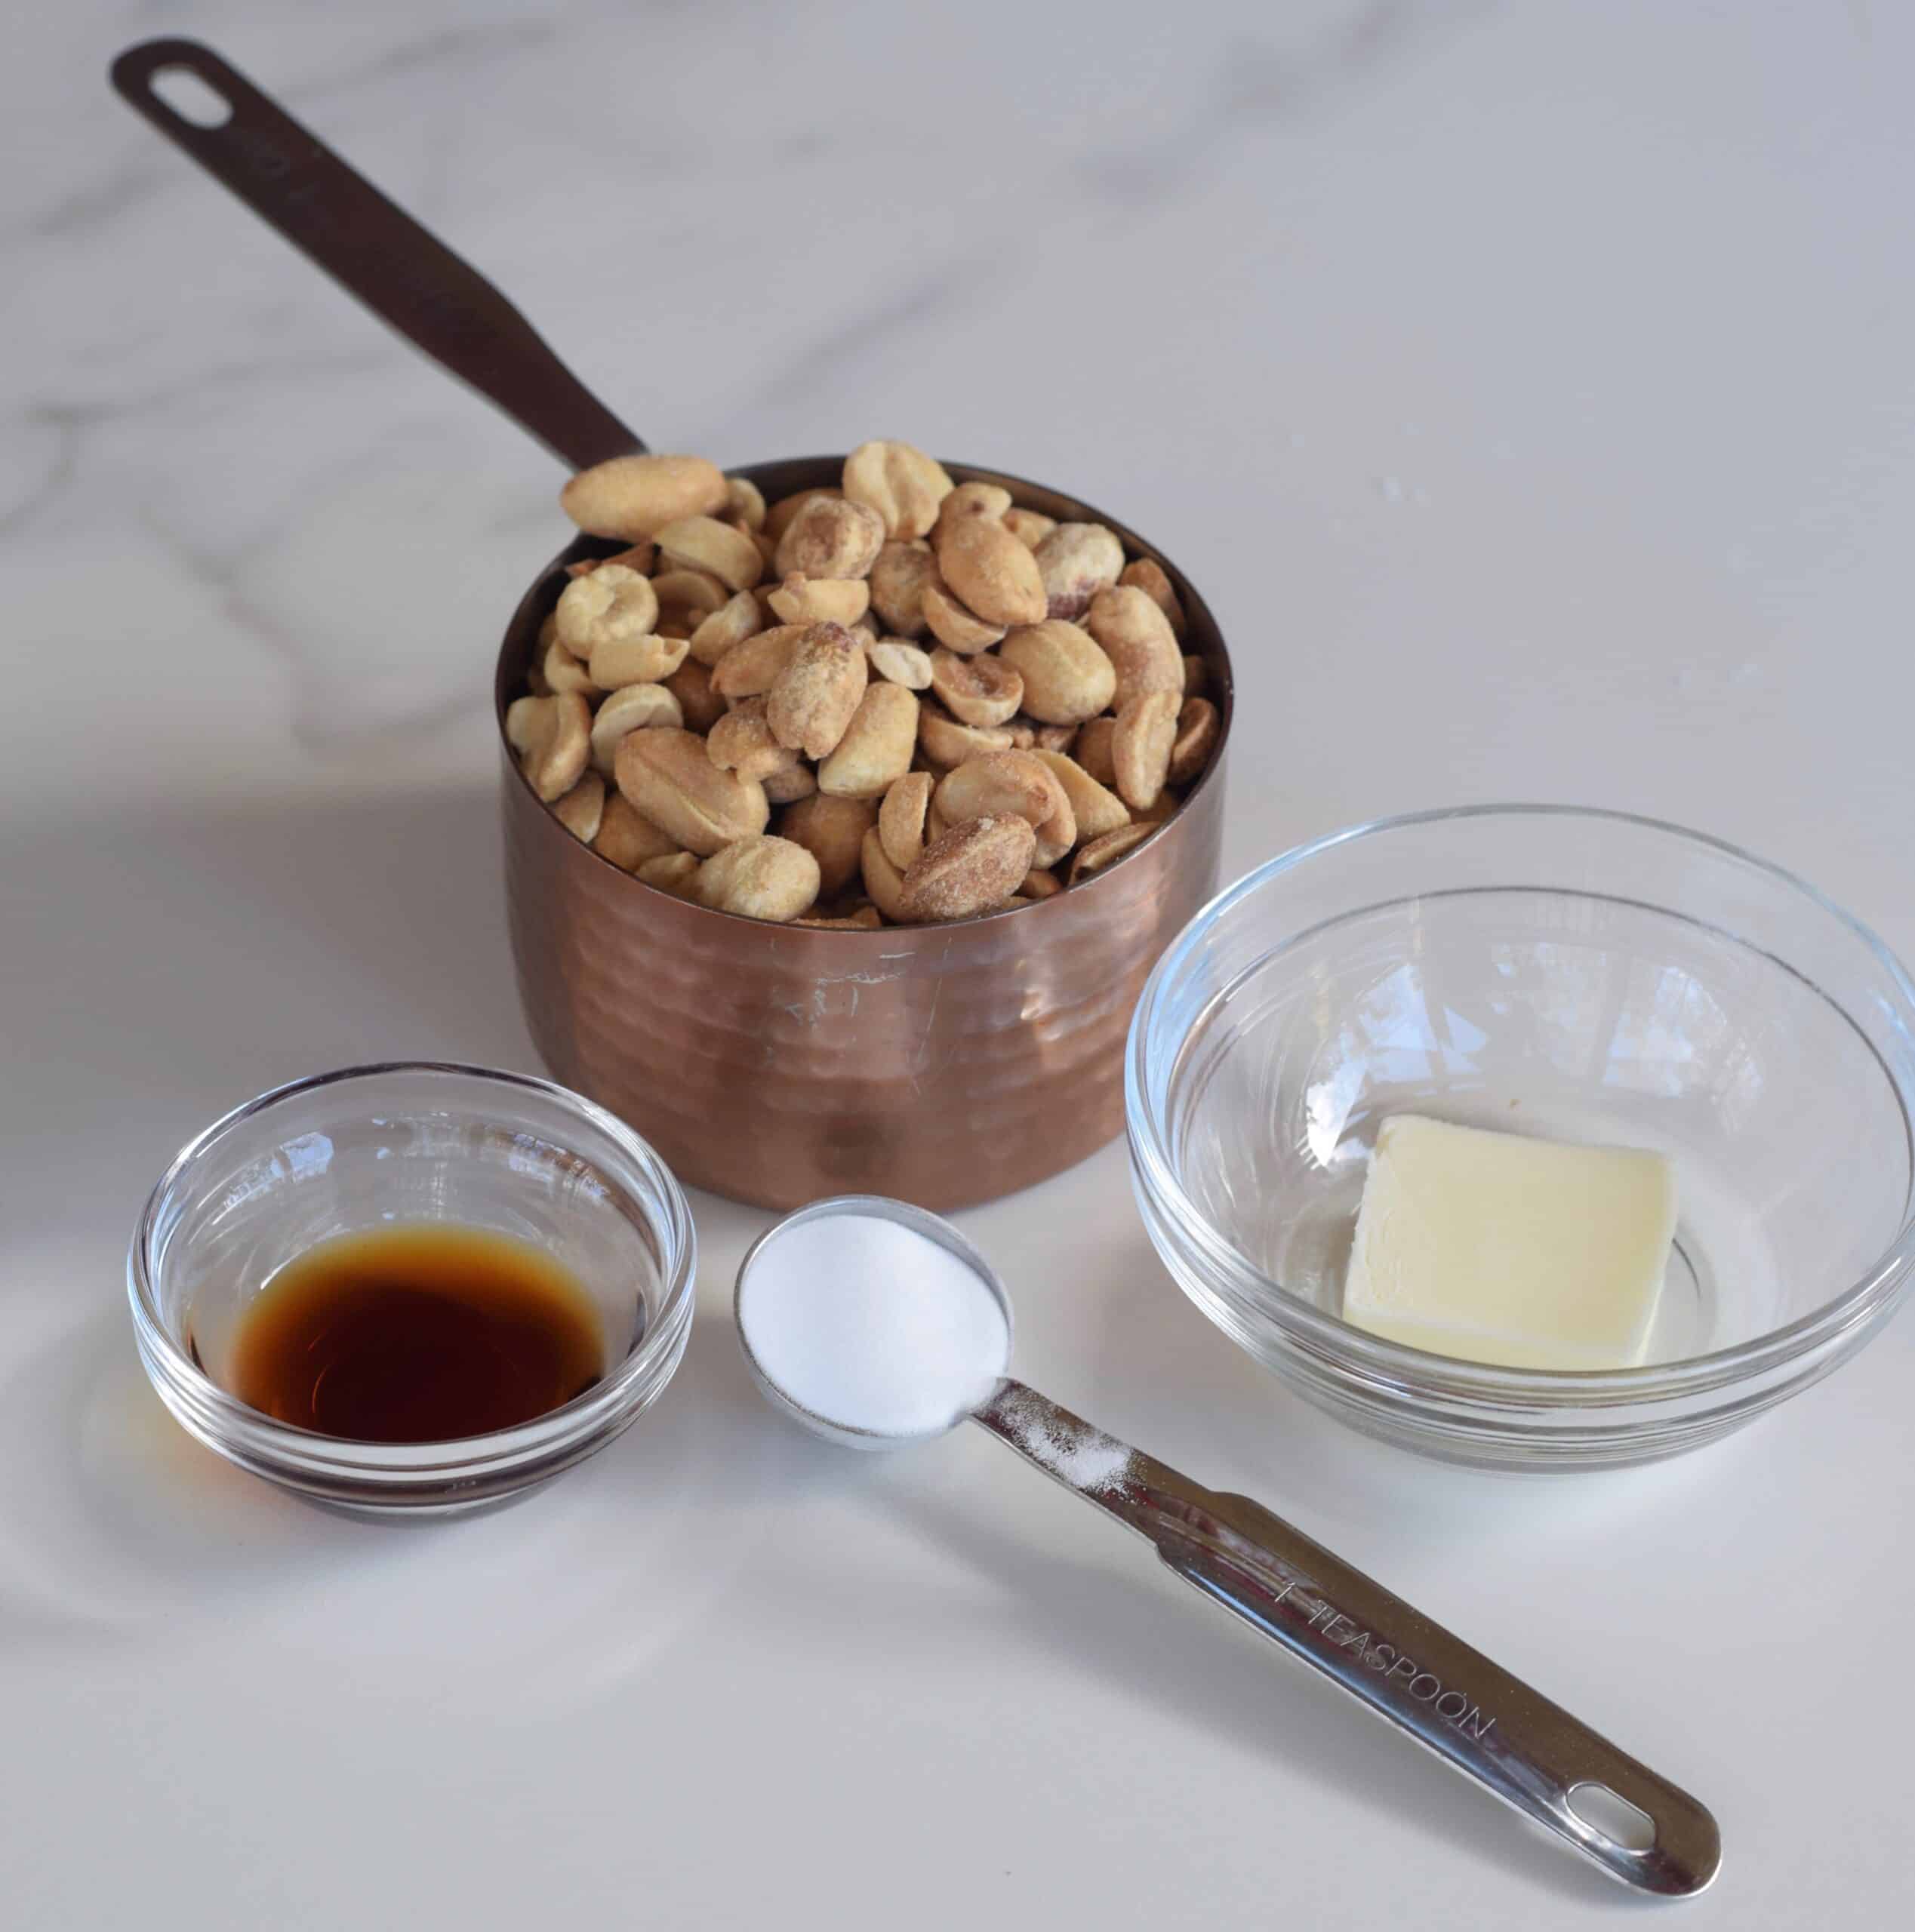 Microwave peanut brittle recipe ingredients set into individual bowls.